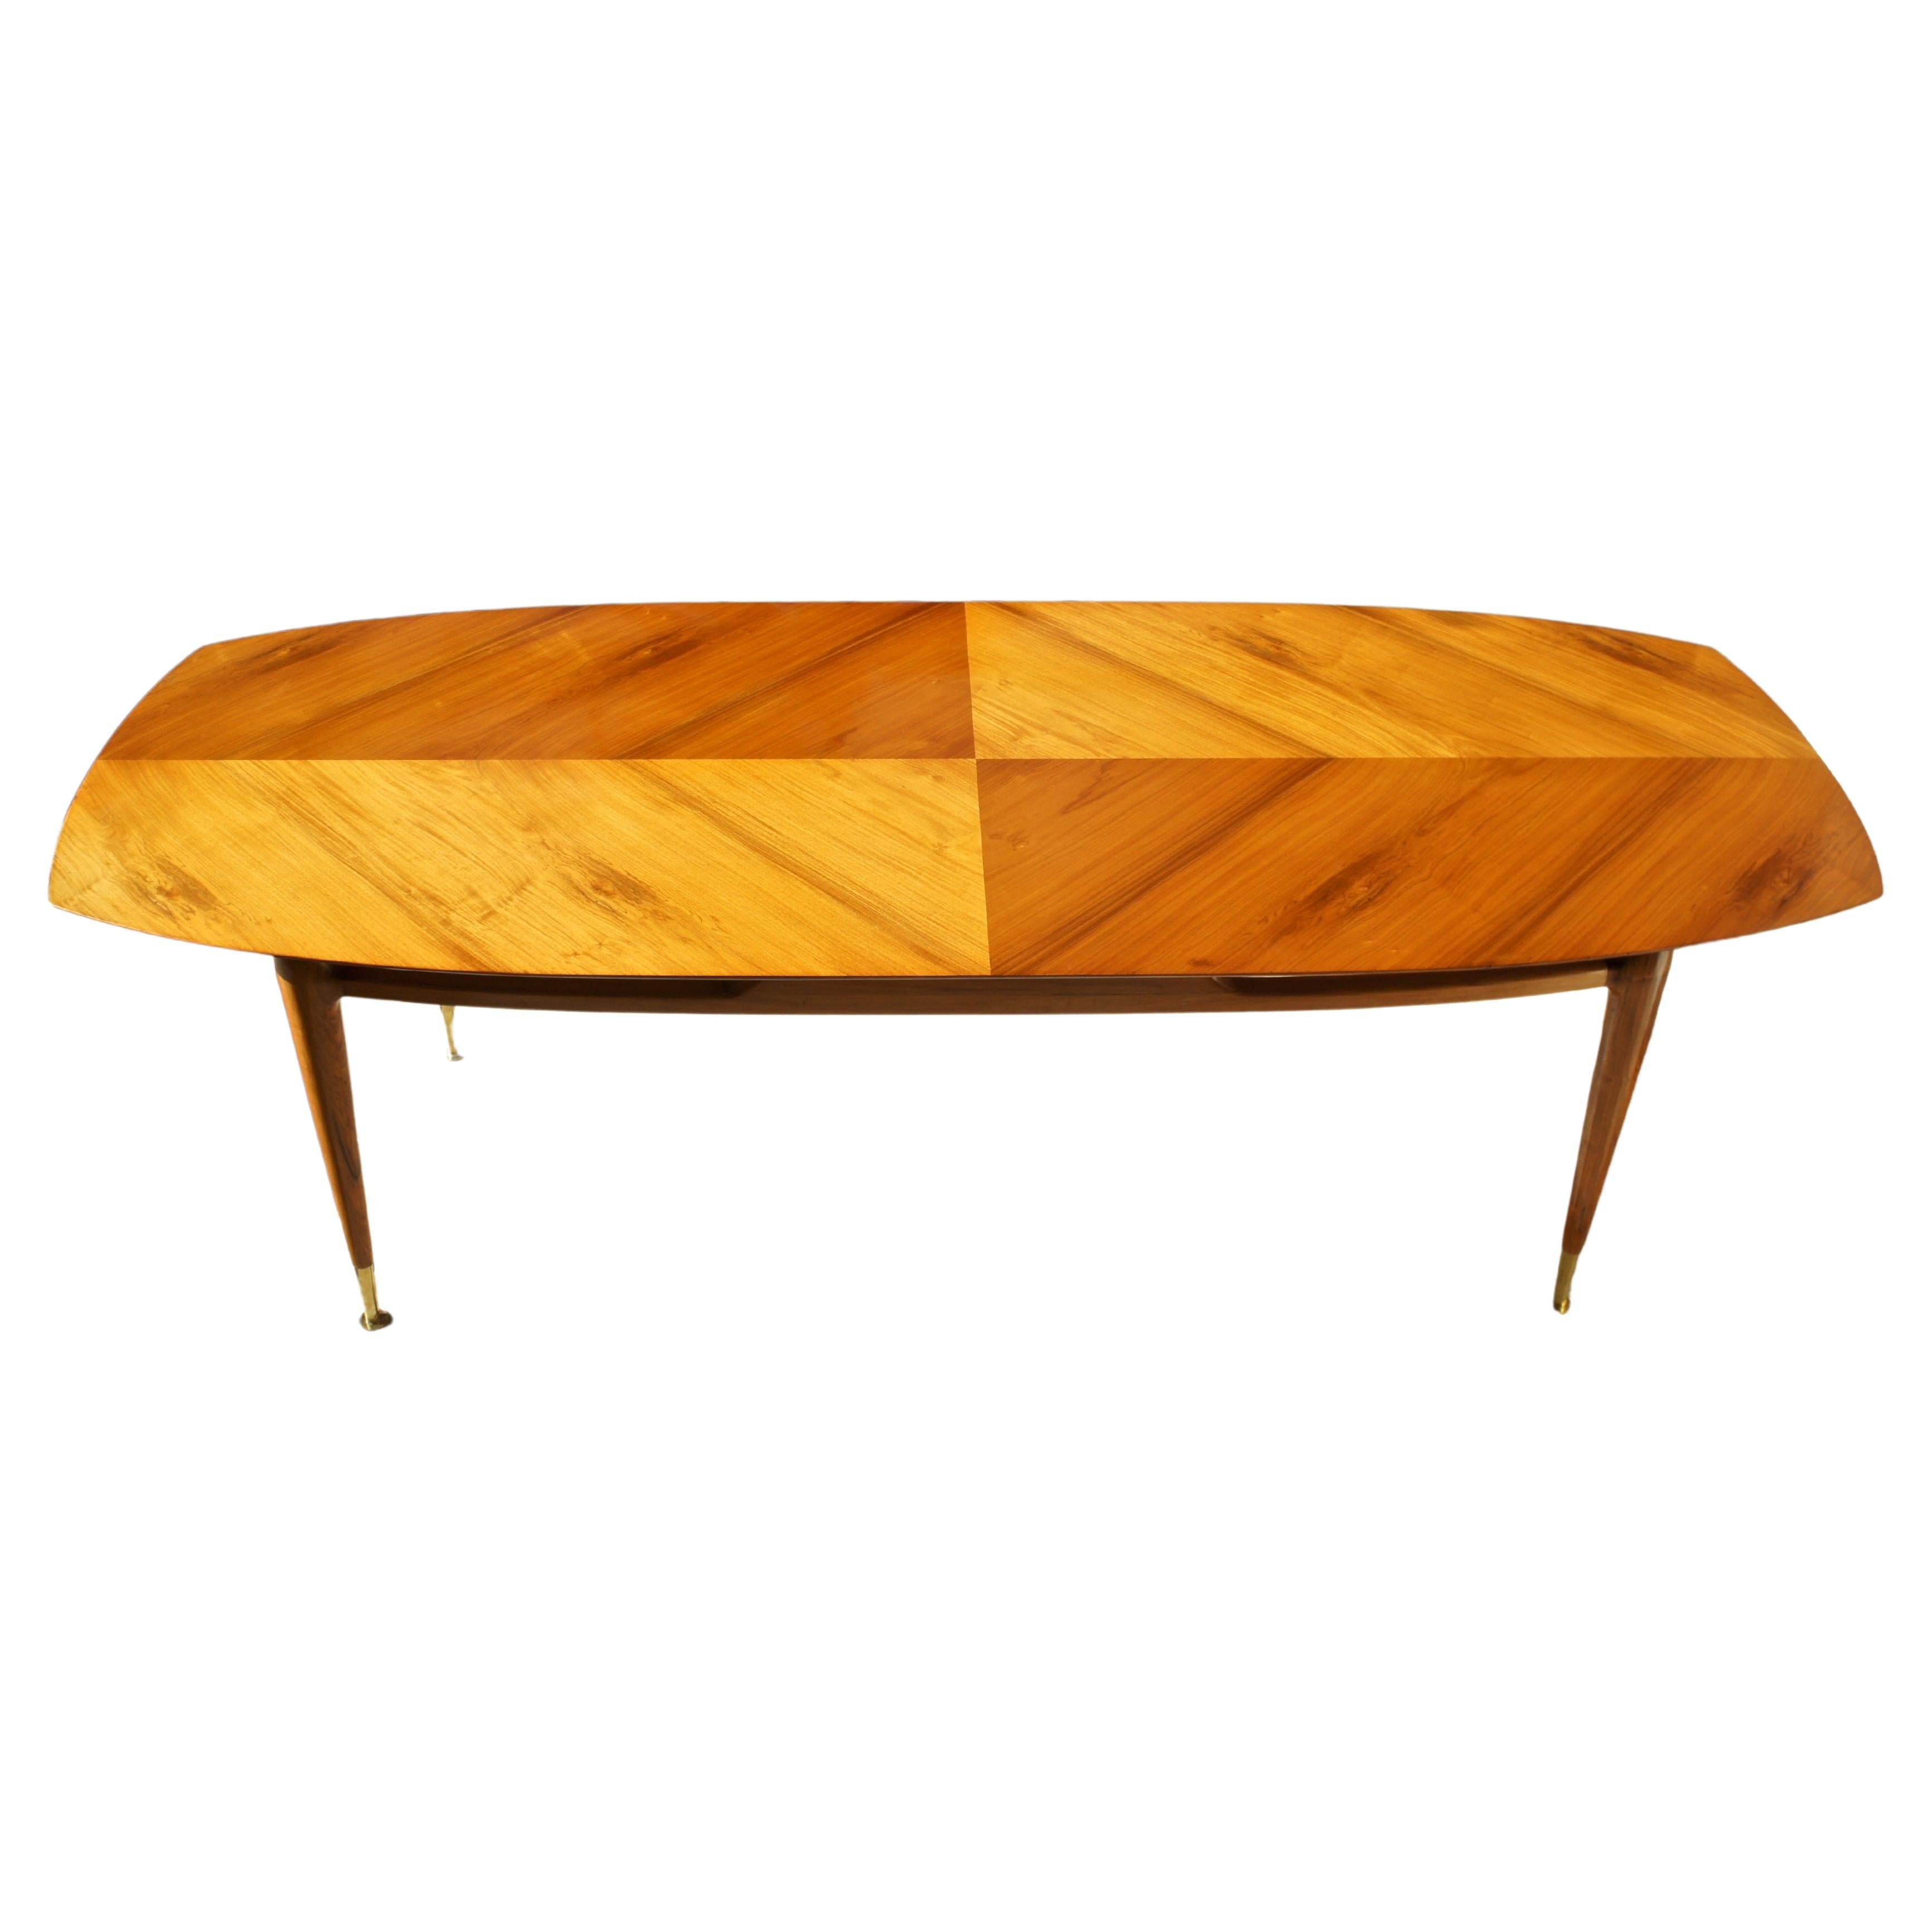 Extraordinary and unique dining table. Its structure is made of solid caviuna; the table top has a caviuna finishing with brass details. This is definitely a masterpiece by Scapinelli.

This table was photographed for the book 